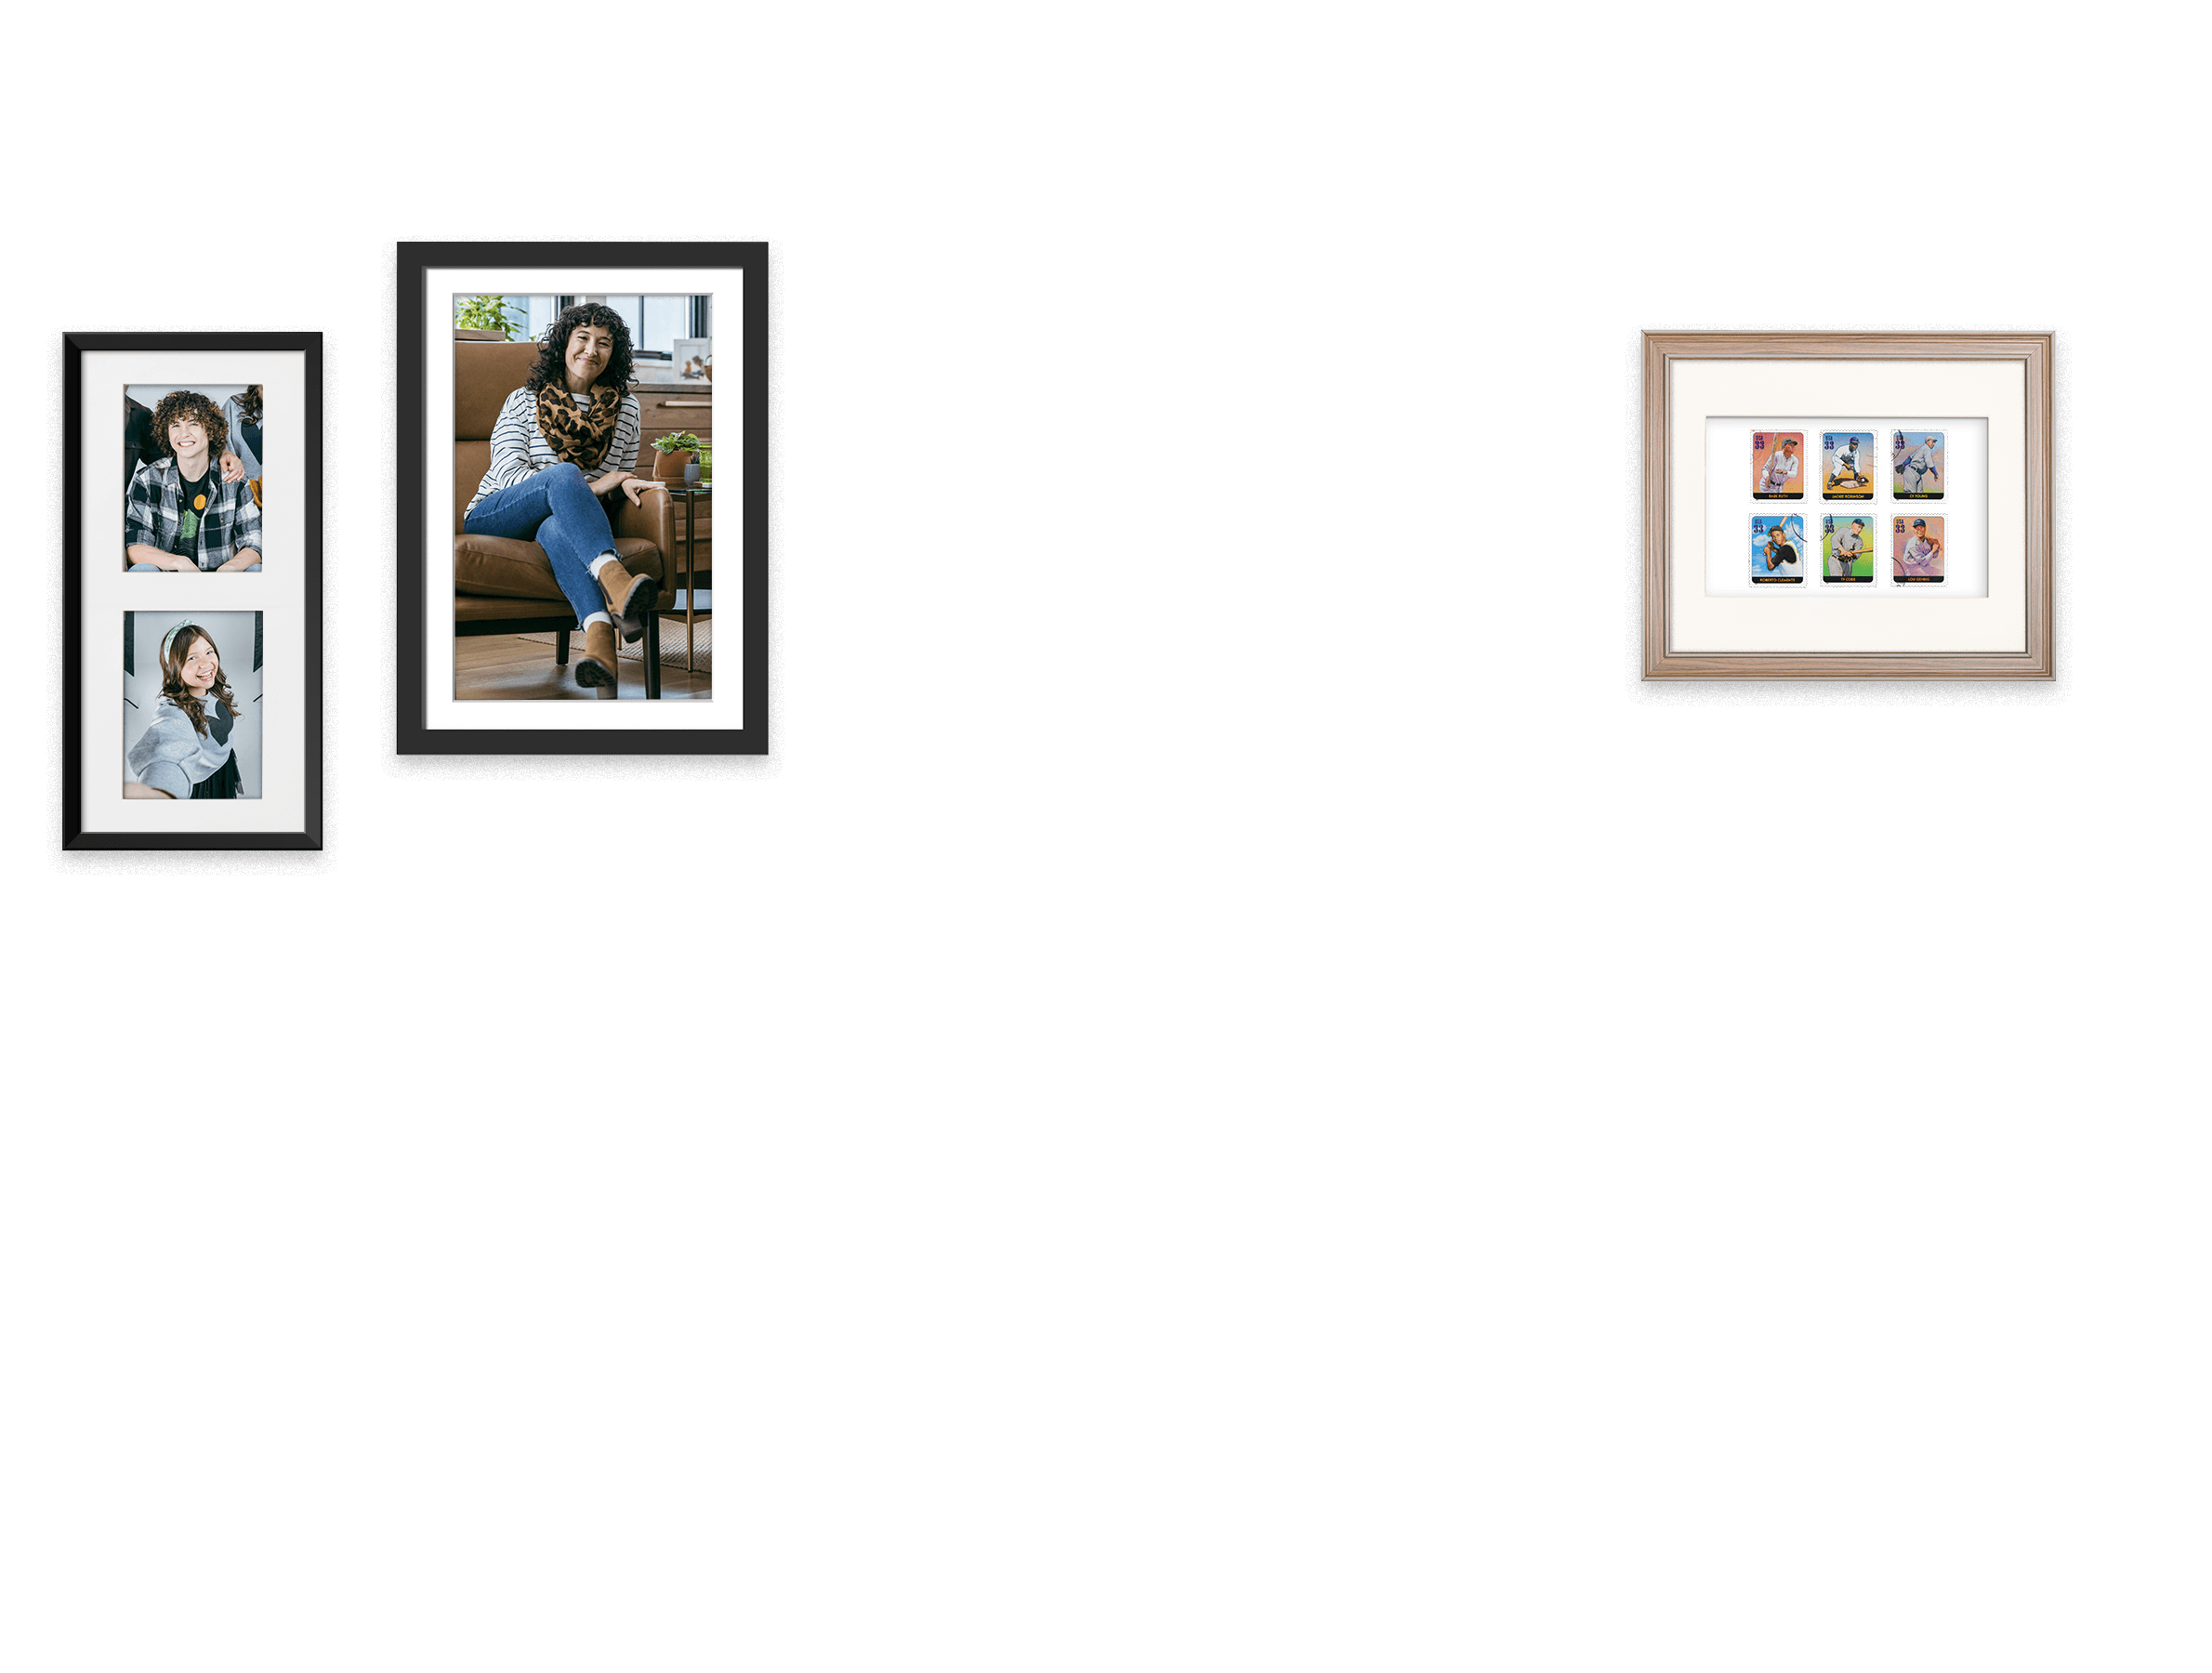 Picture frames with family, kids, and collector baseball cards